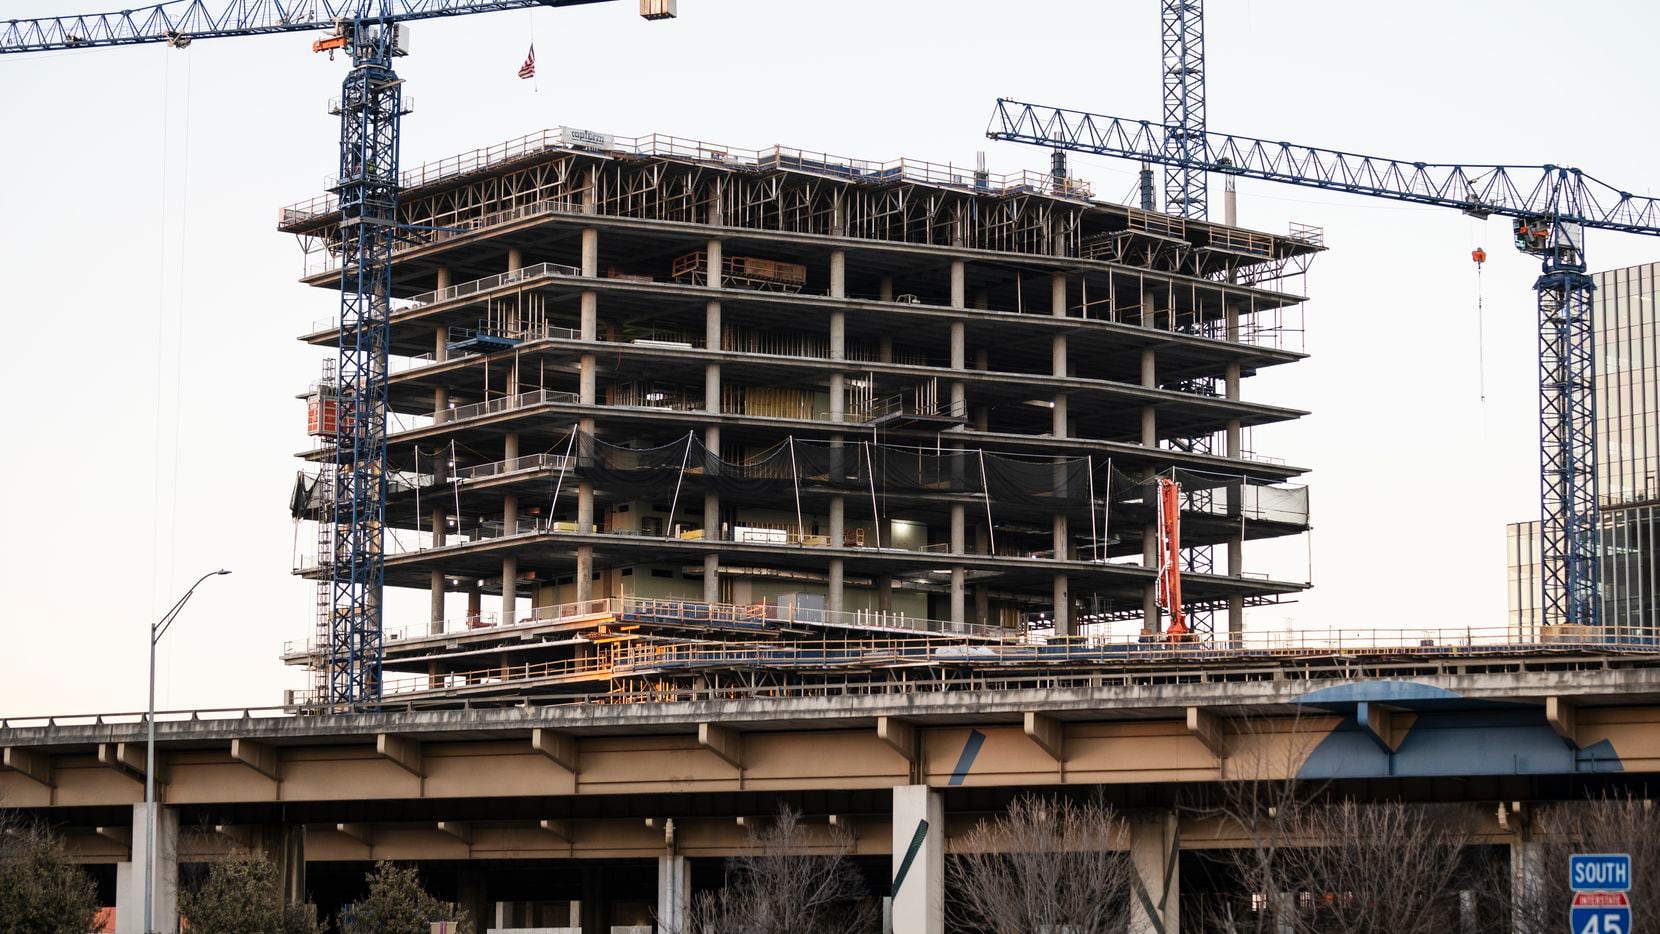 About 6.4 million square feet of office space is being built in the D-FW area.